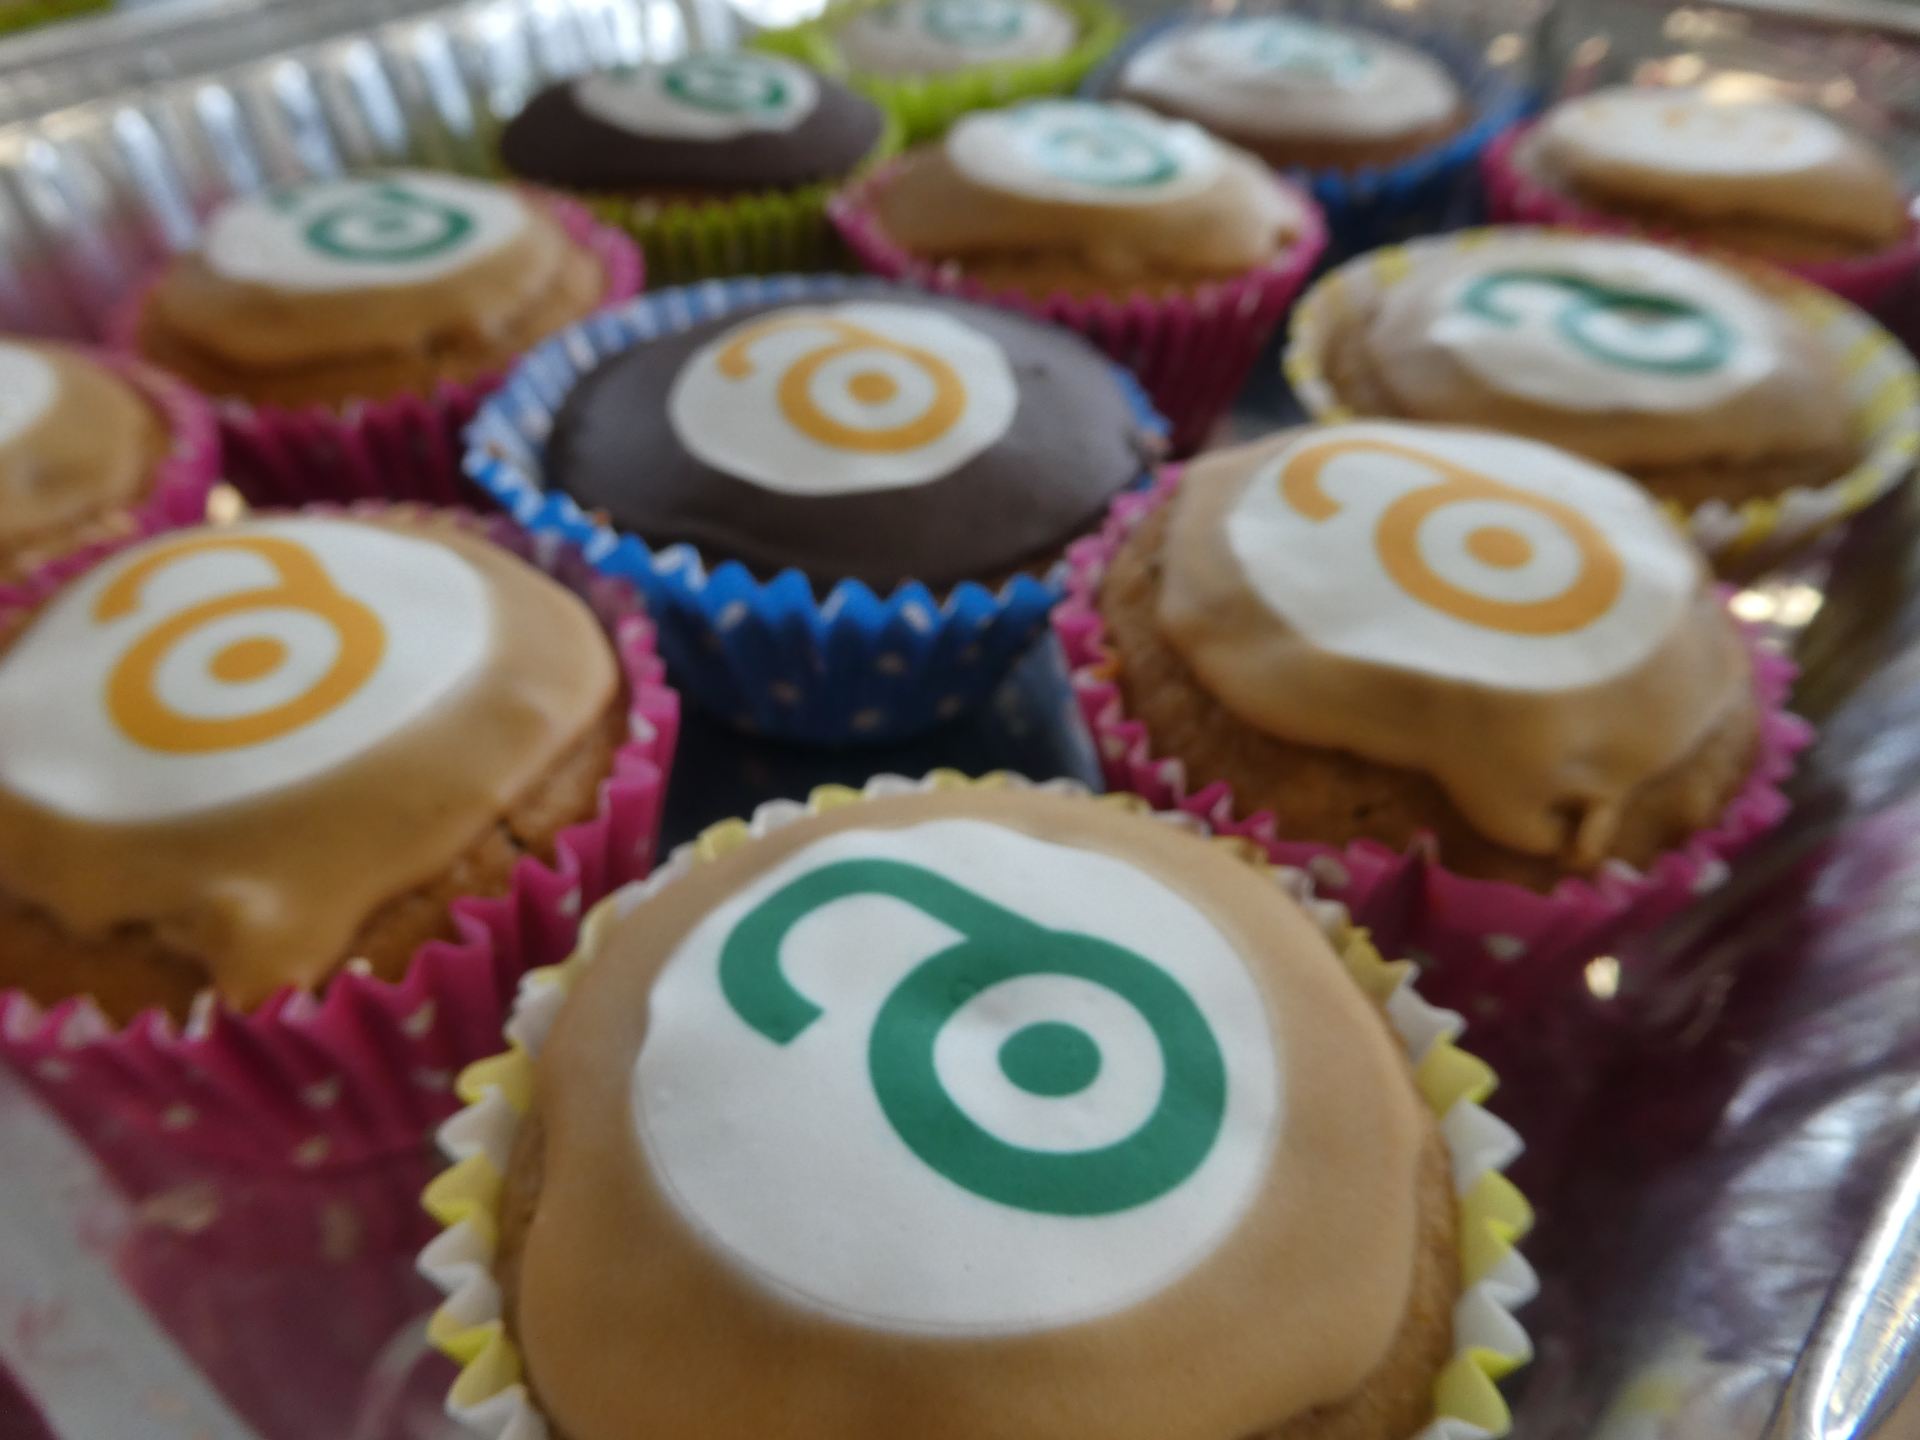 A tray of small iced cupcakes with the open access logo in green or gold on top 